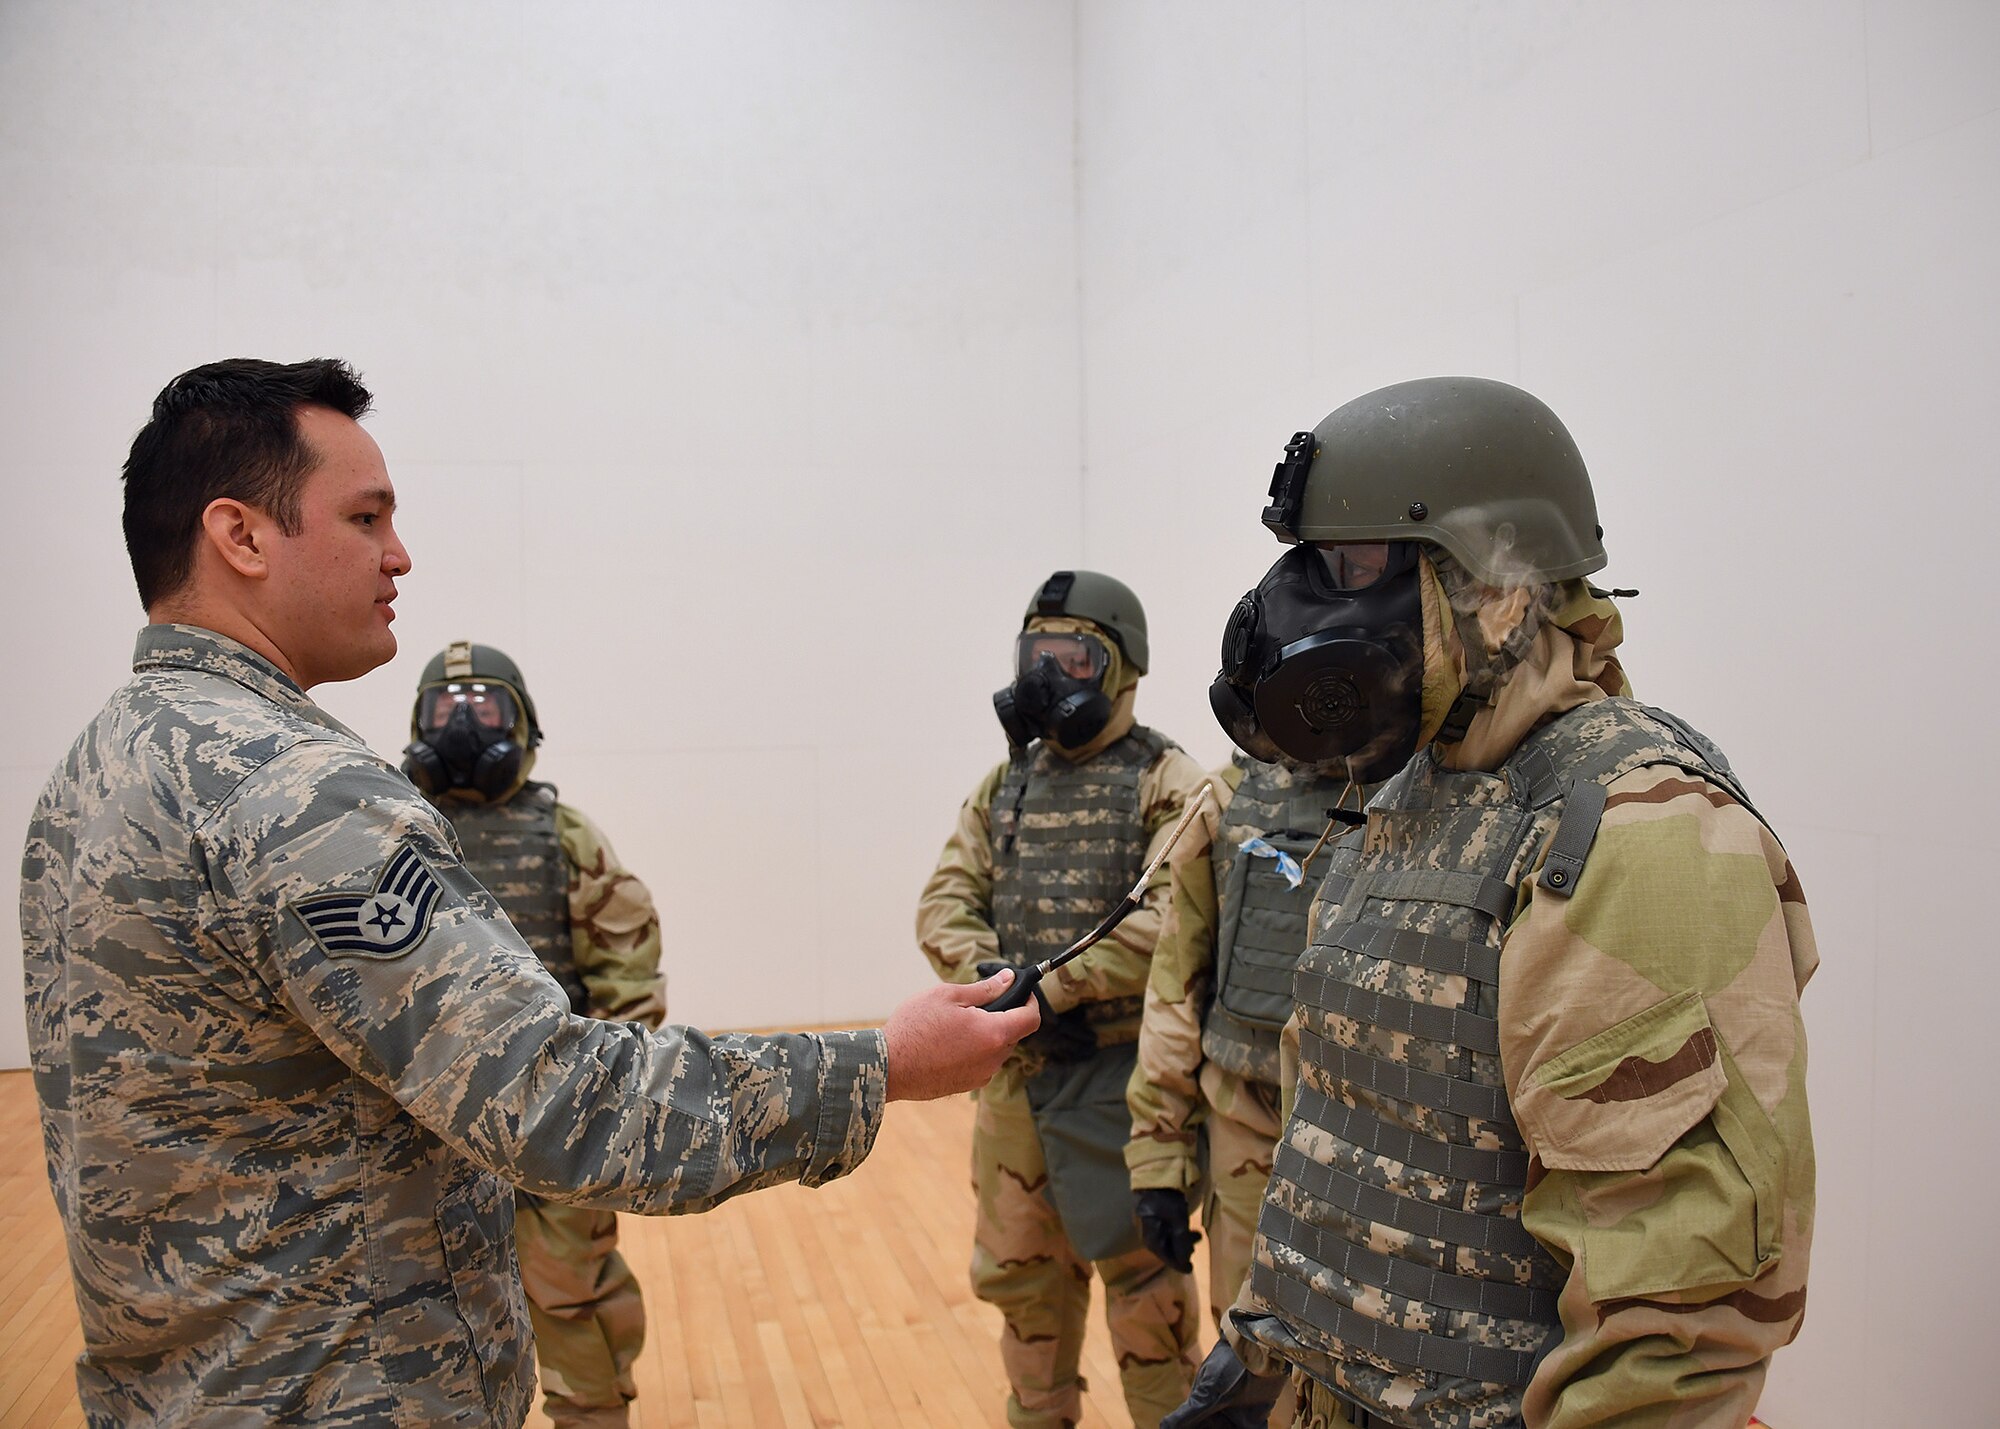 Staff Sgt. Jeremy Breillatt, emergency management craftsman with the 319th Civil Engineer Squadron, left, puffs stannic chloride gas towards Tech. Sgt. Andres Dominguez, noncommissioned officer in charge of relocations with the 319th Force Support Squadron, to test the seal of his gas mask during a readiness competition May 18, 2018, on Grand Forks Air Force Base, North Dakota. Airmen were tested on their ability to put on mission oriented protective posture gear, in addition to providing self-aid and buddy care, weapons assembly and map-reading during the competition. (U.S. Air Force photo by Airman 1st Class Elora J. Martinez)